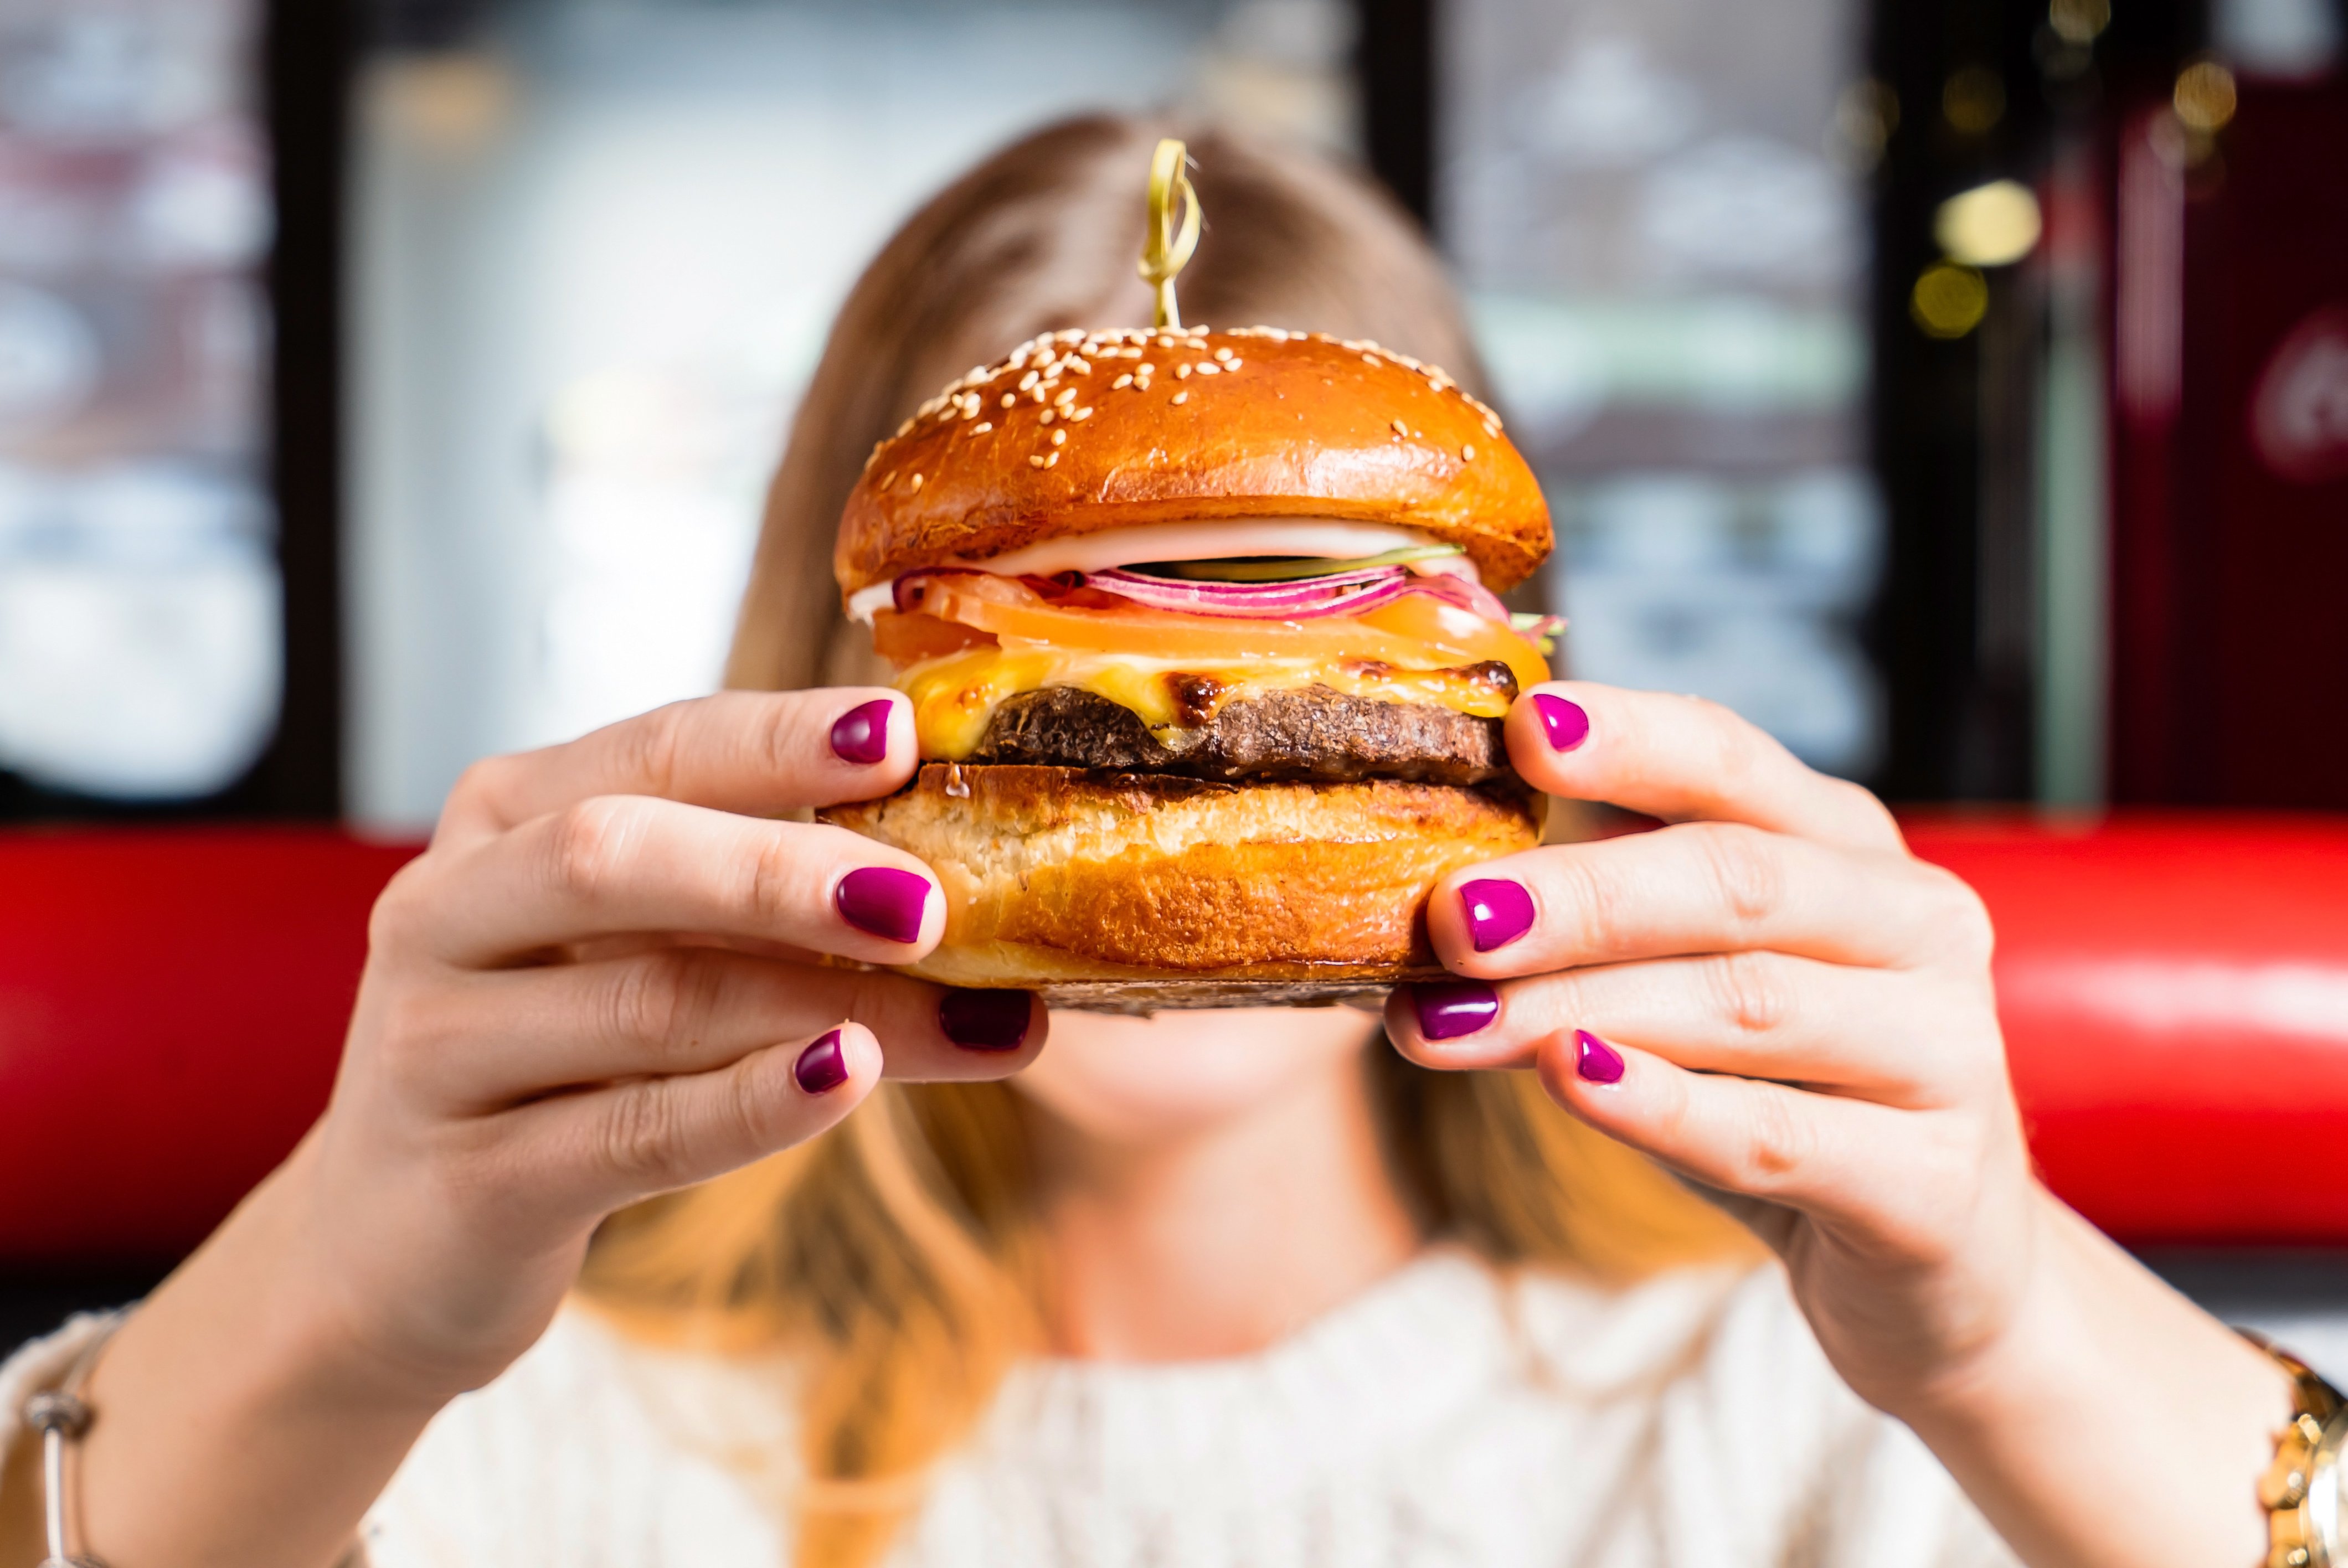 big cheeseburger example for 6 valuable 1-to-1 personalized video tips for digital communicators